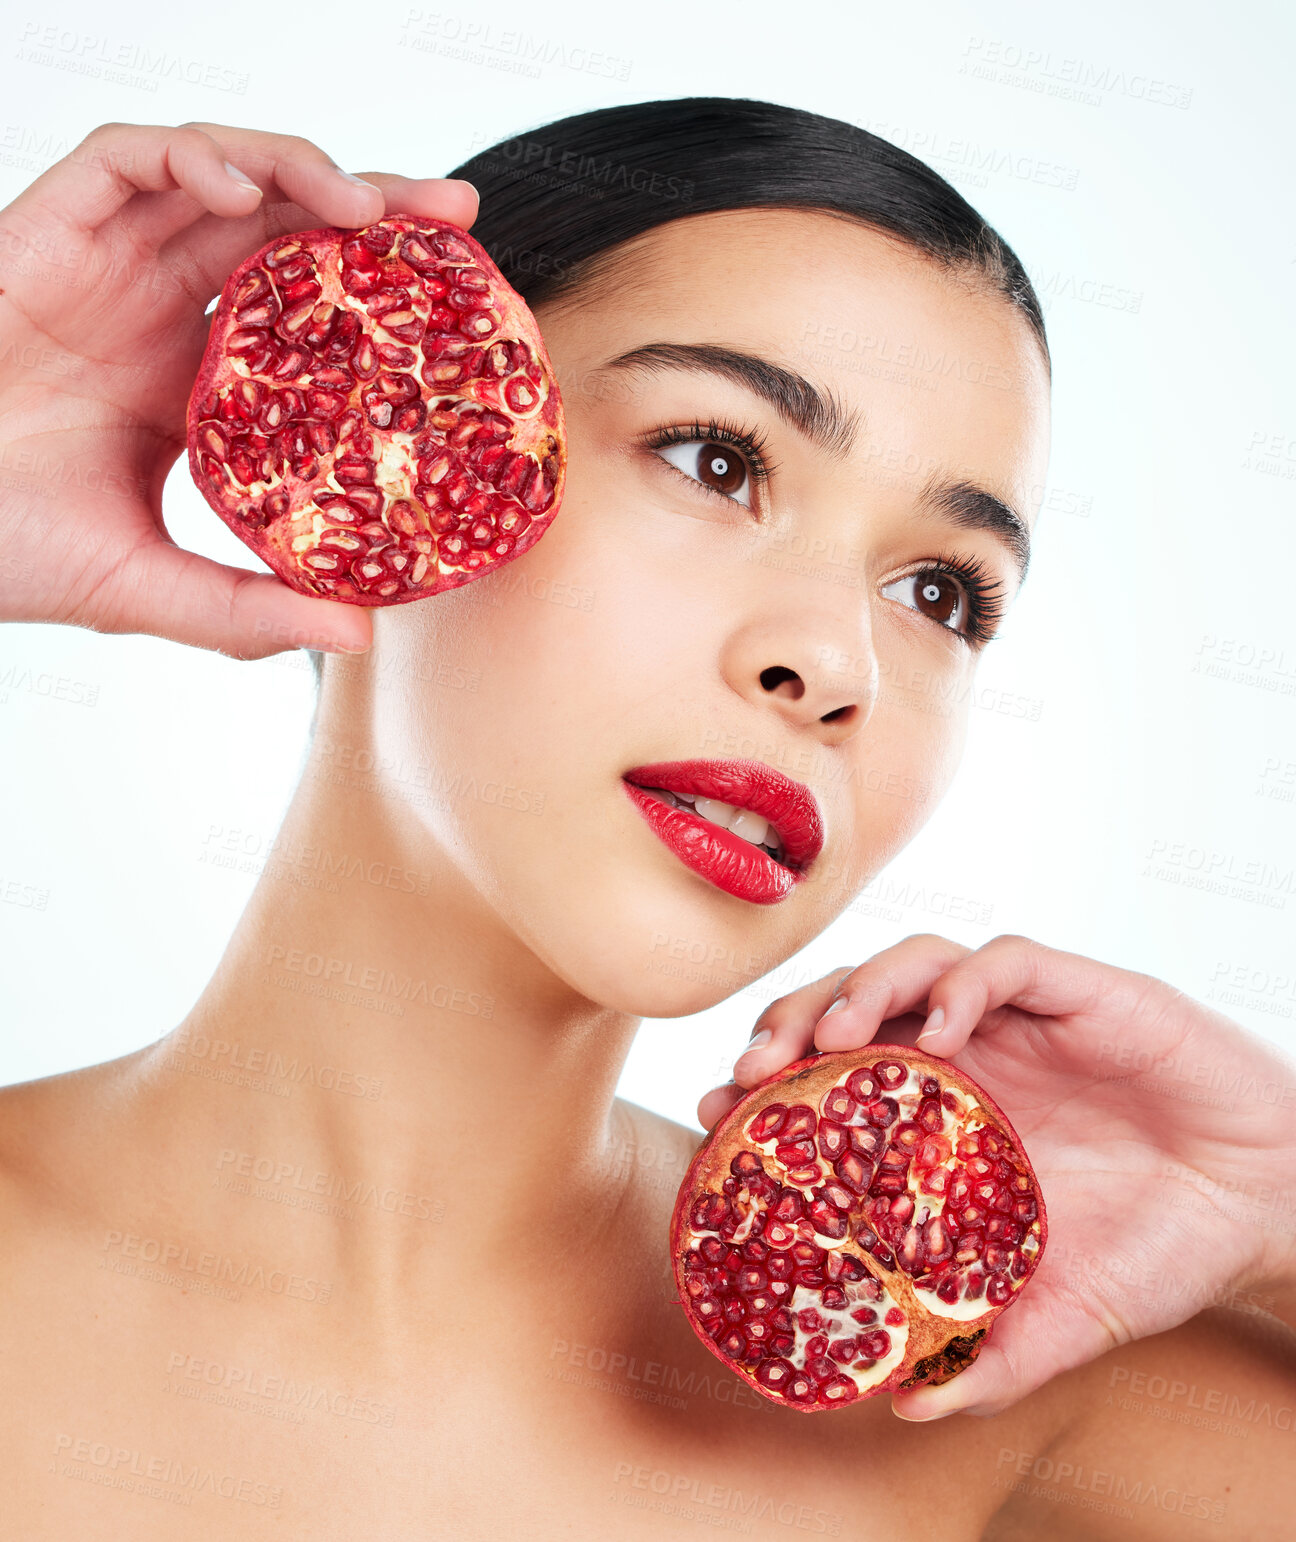 Buy stock photo Studio shot of an attractive young woman posing with a pomegranate against a light background